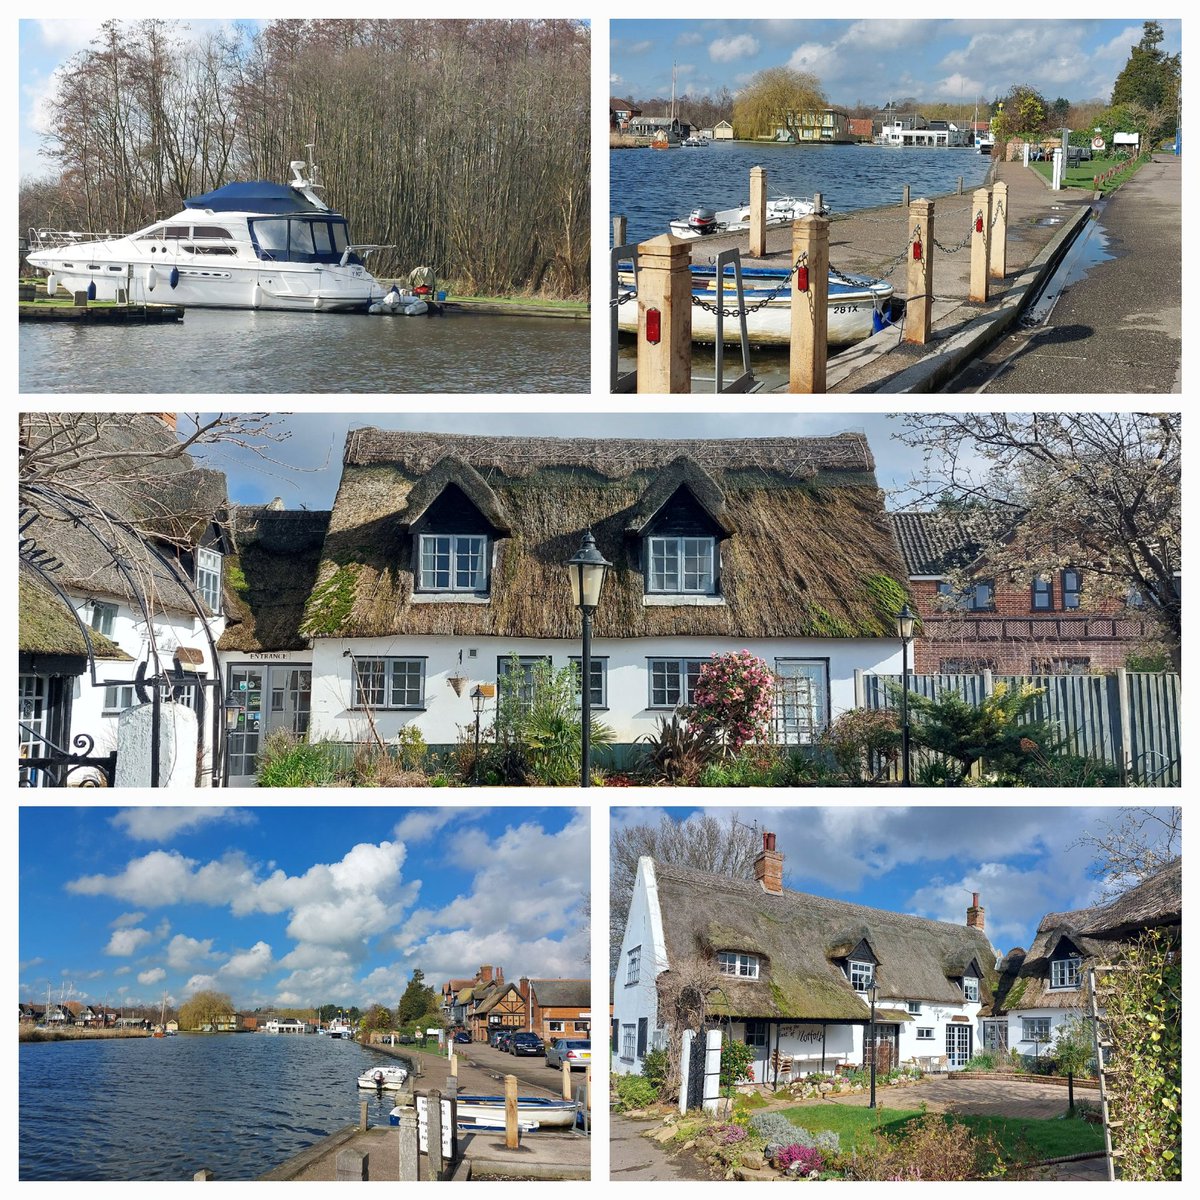 Happy Monday from Horning #thebroads #norfolkbroads